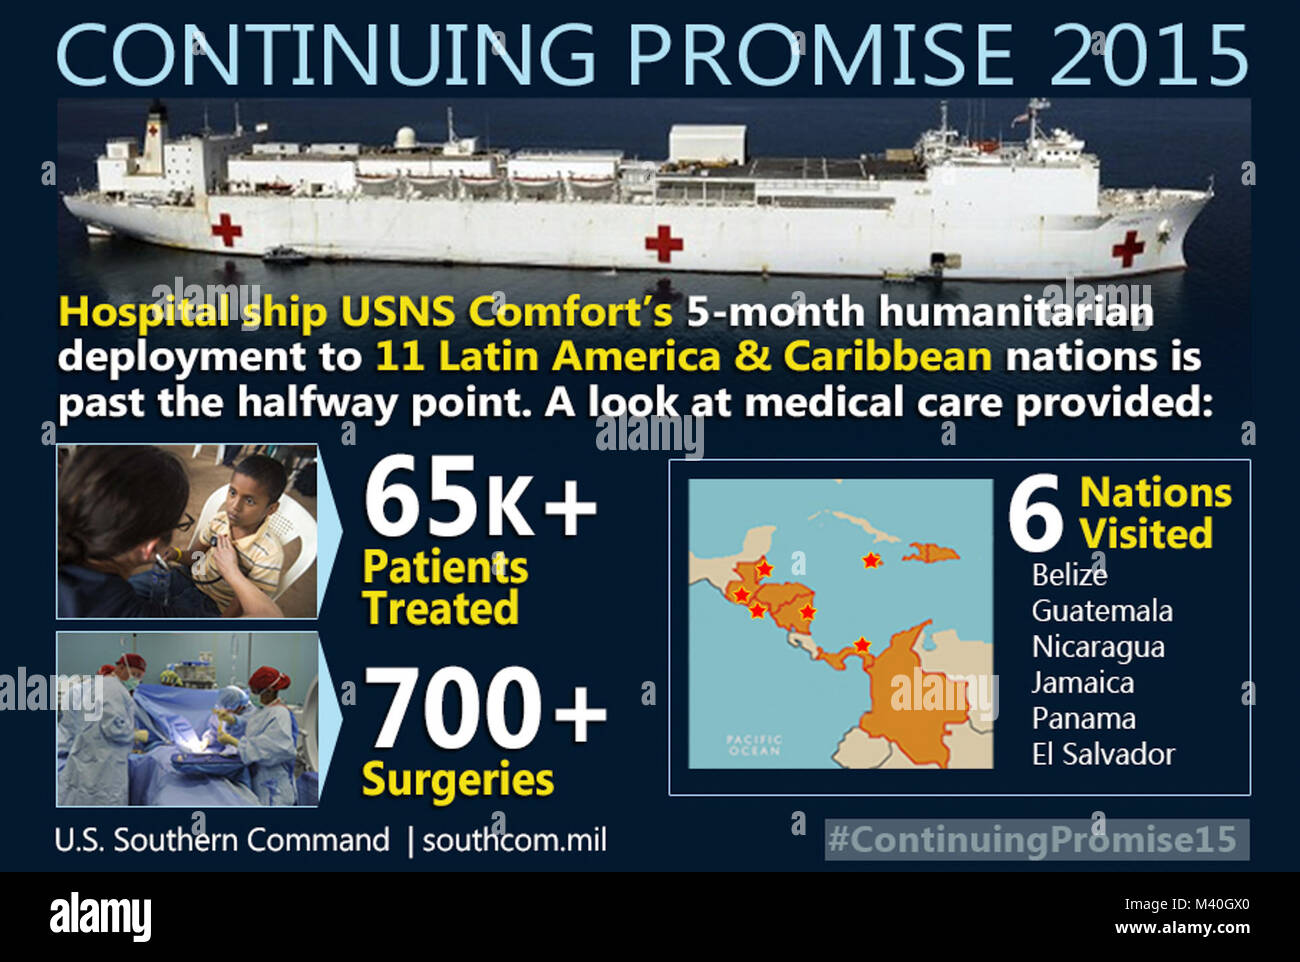 INFOGRAHIC.  Includes picture of USNS Comfort, photos of military medical care and map of Central and South America.  CAPTION: CONTINUING PROMISE 2015: Hospital ship USNS Comfort’s 5-month humanitarian deployment to 11 Latin America & Caribbean nations is past the halfway point. A look at medical care provided: 65K+ Patients Treated 700+ Surgeries 6 nations visited: Belize, Guatemala, Nicaragua, Jamaica, Panama, El Salvador SOUTHCOM infographic  Continuing Promise 2015 pasts halfway point by ussouthcom Stock Photo